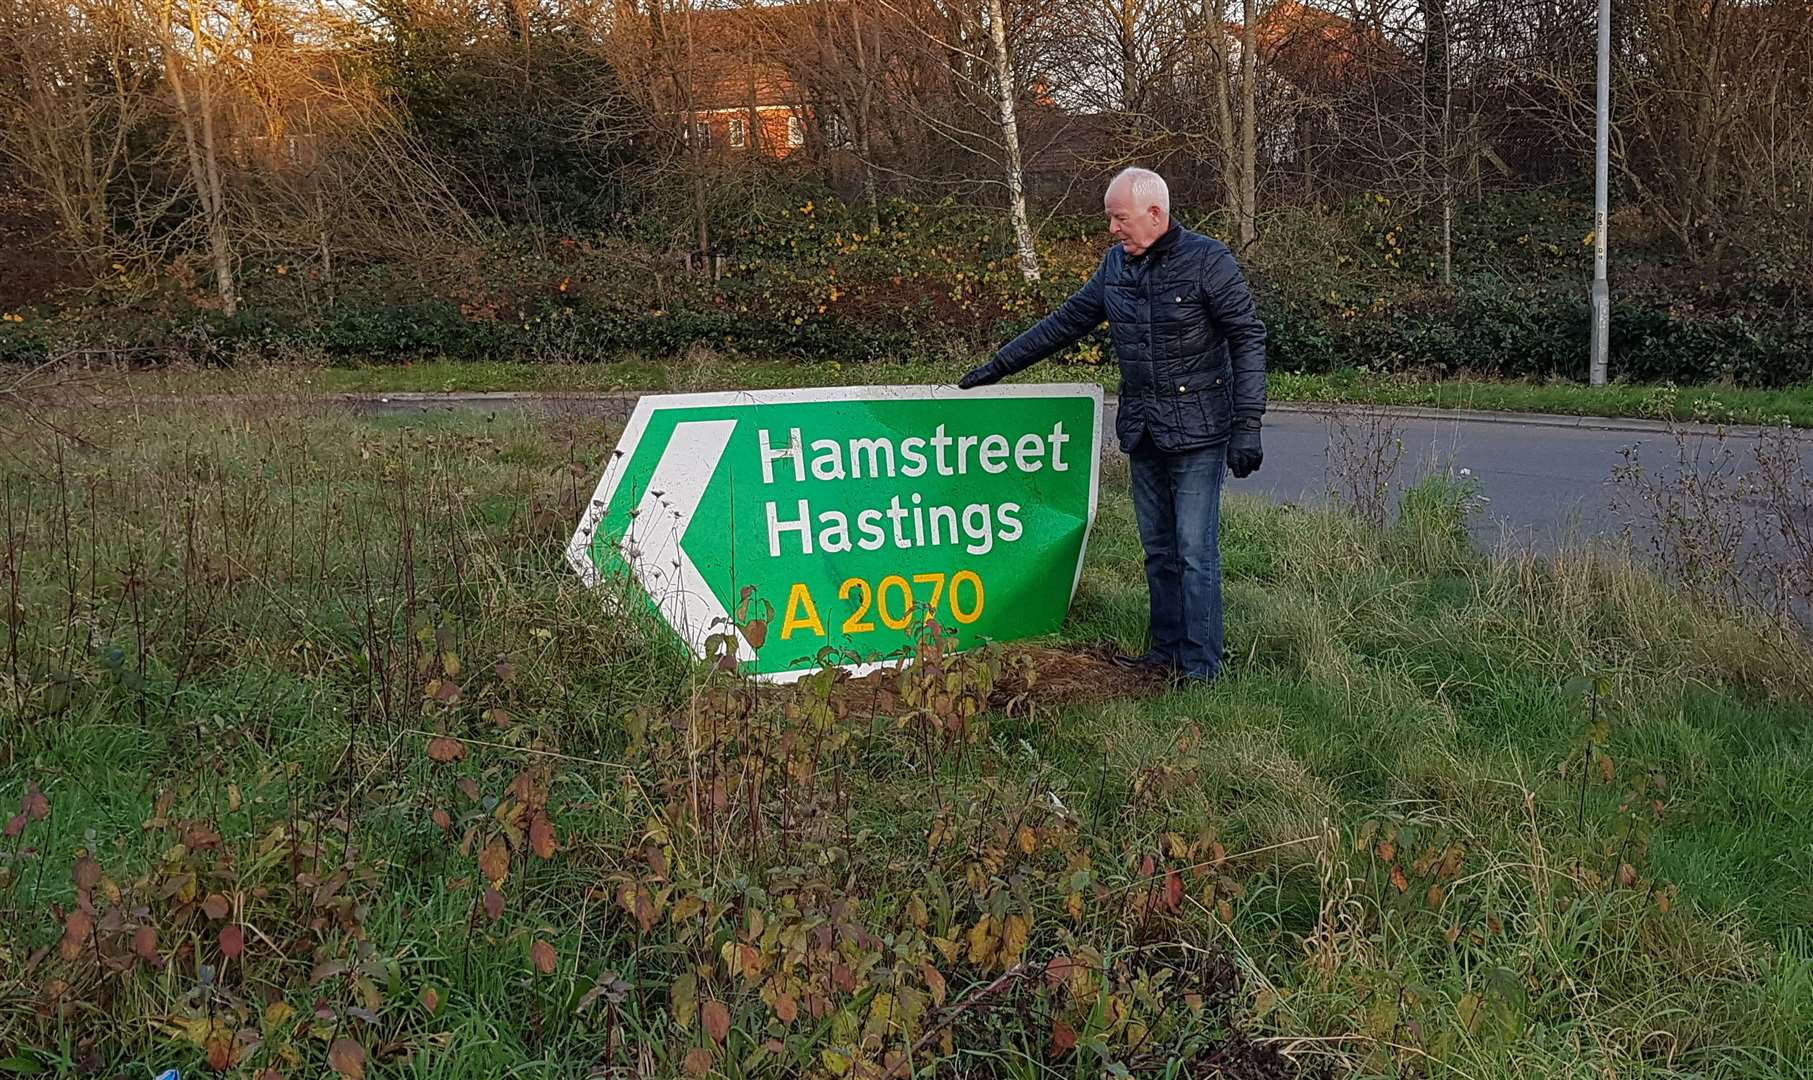 Mr Murray-Roscoe inspects a damaged sign on the roundabout